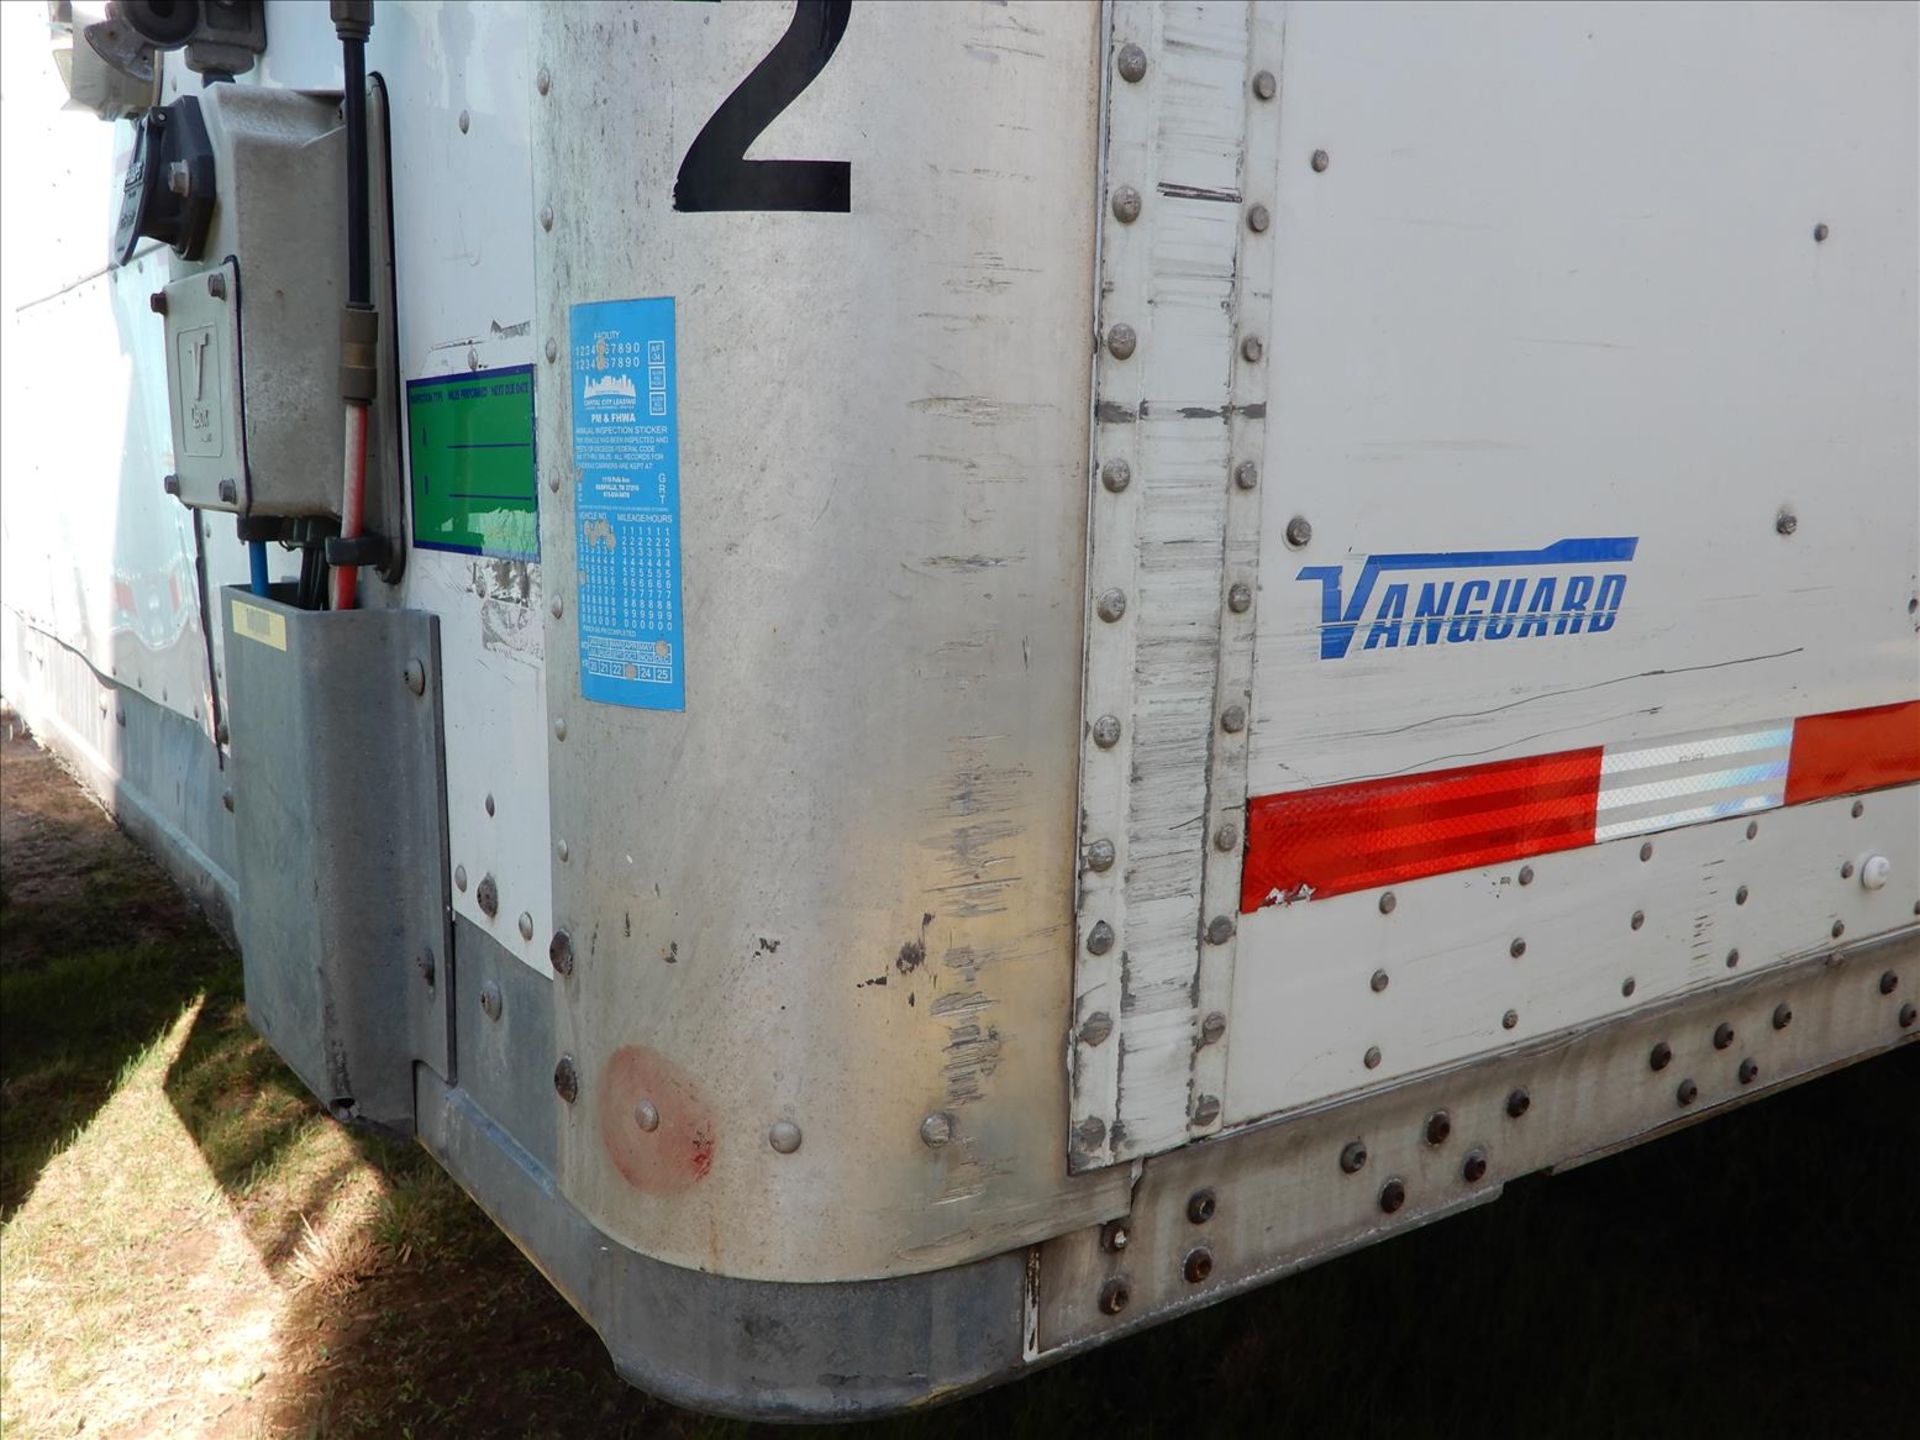 2012 Vanguard Trailer - Located in Indianapolis, IN - Image 7 of 29